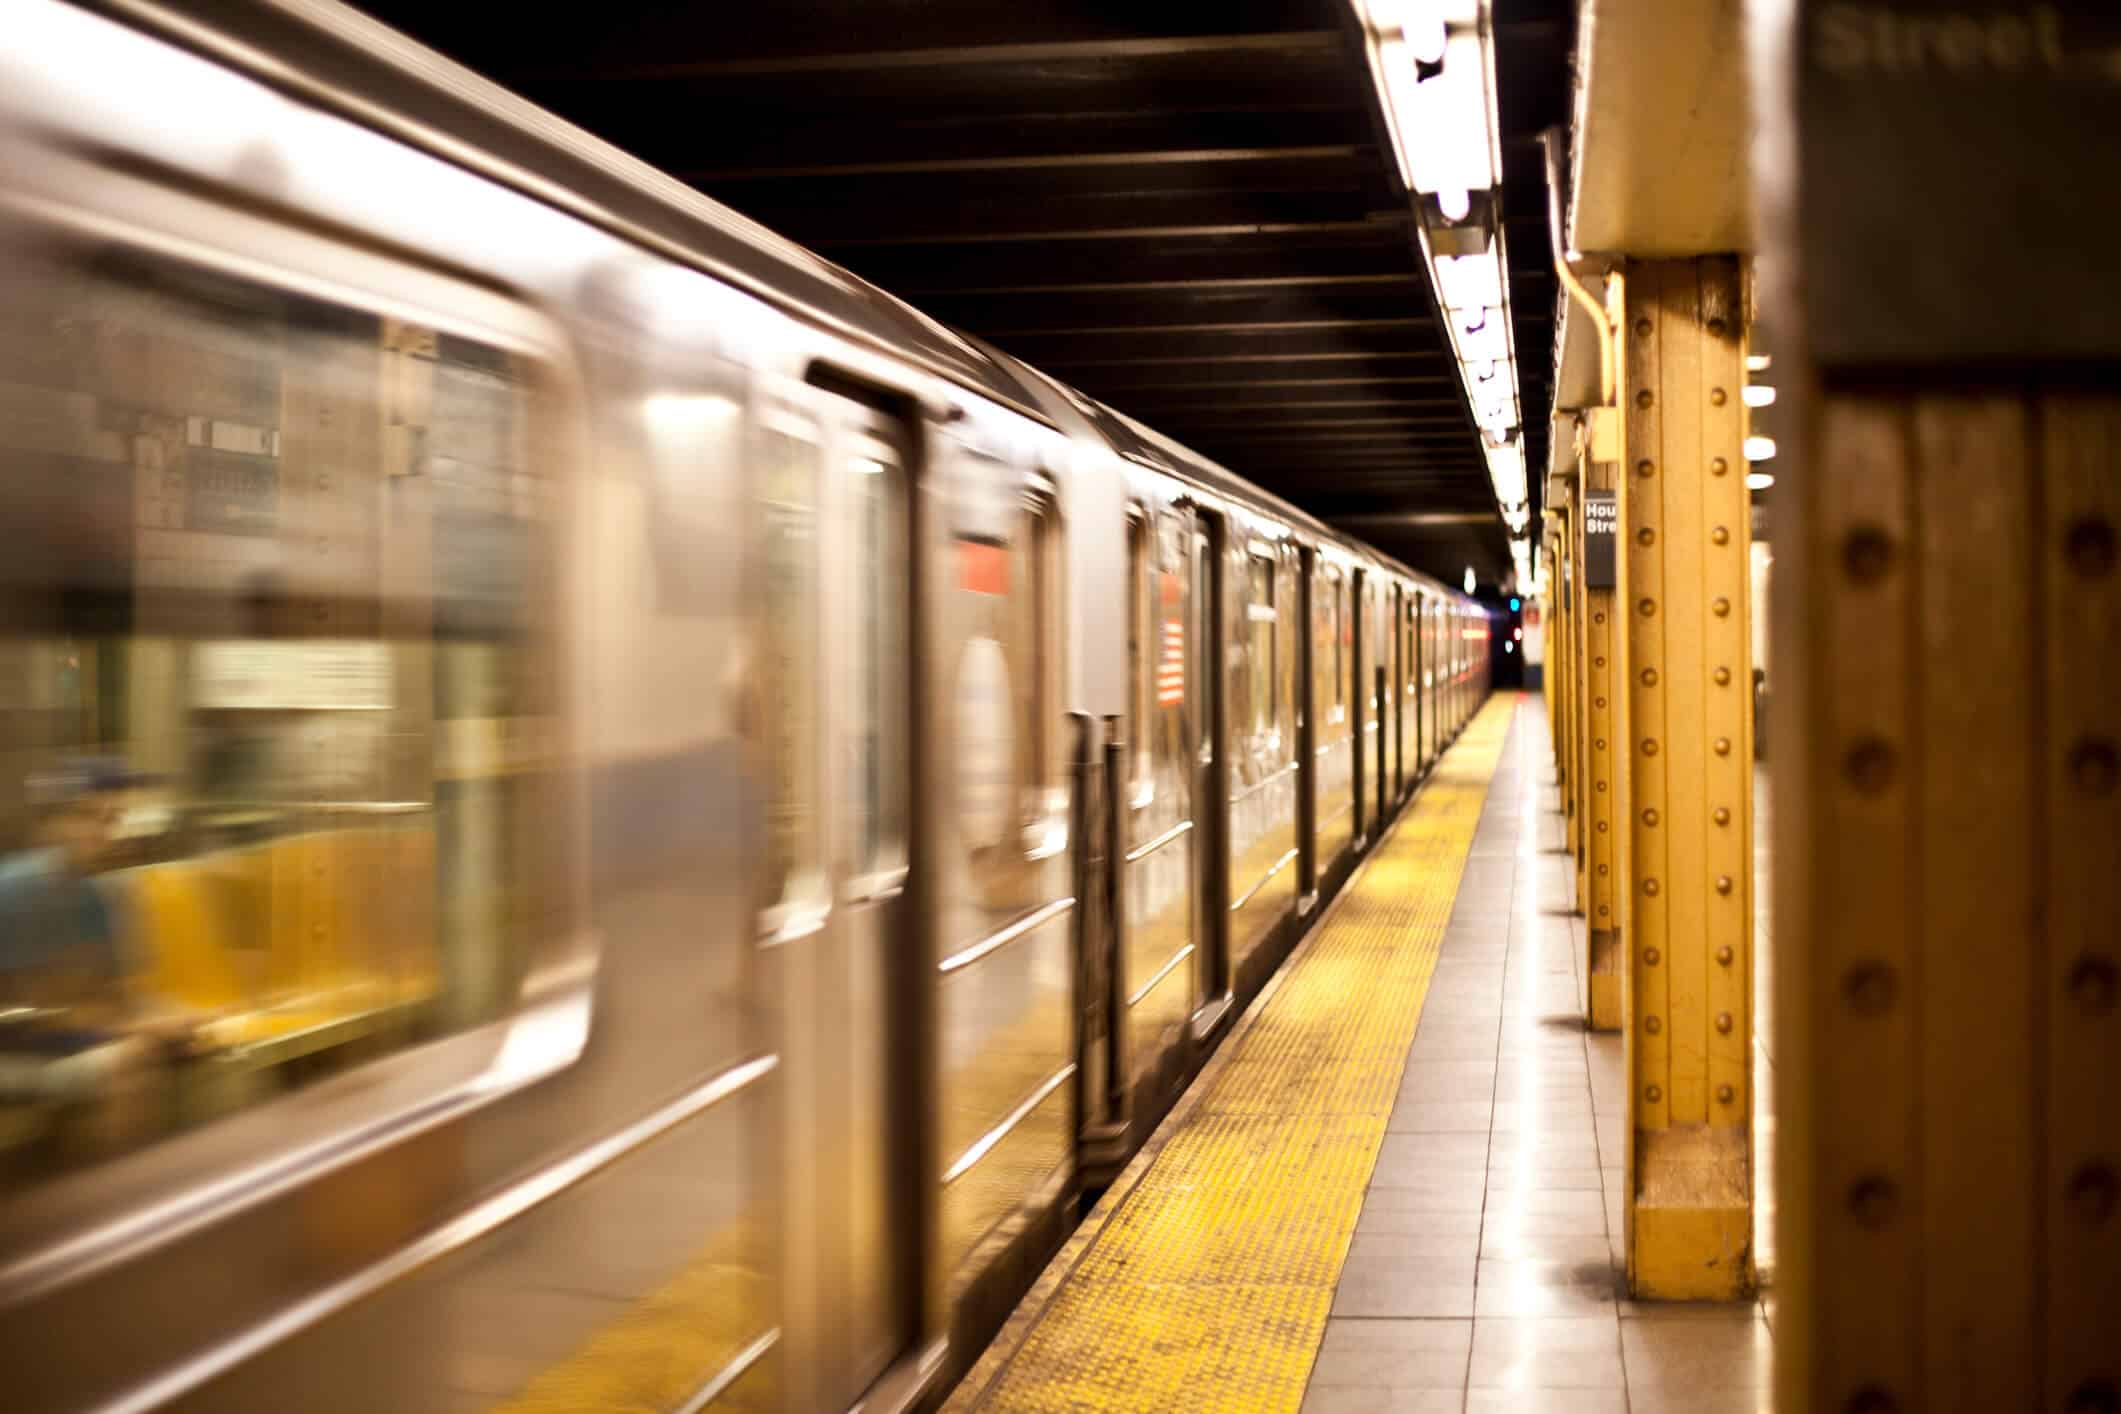 New York Subway and Mass Transit Accidents